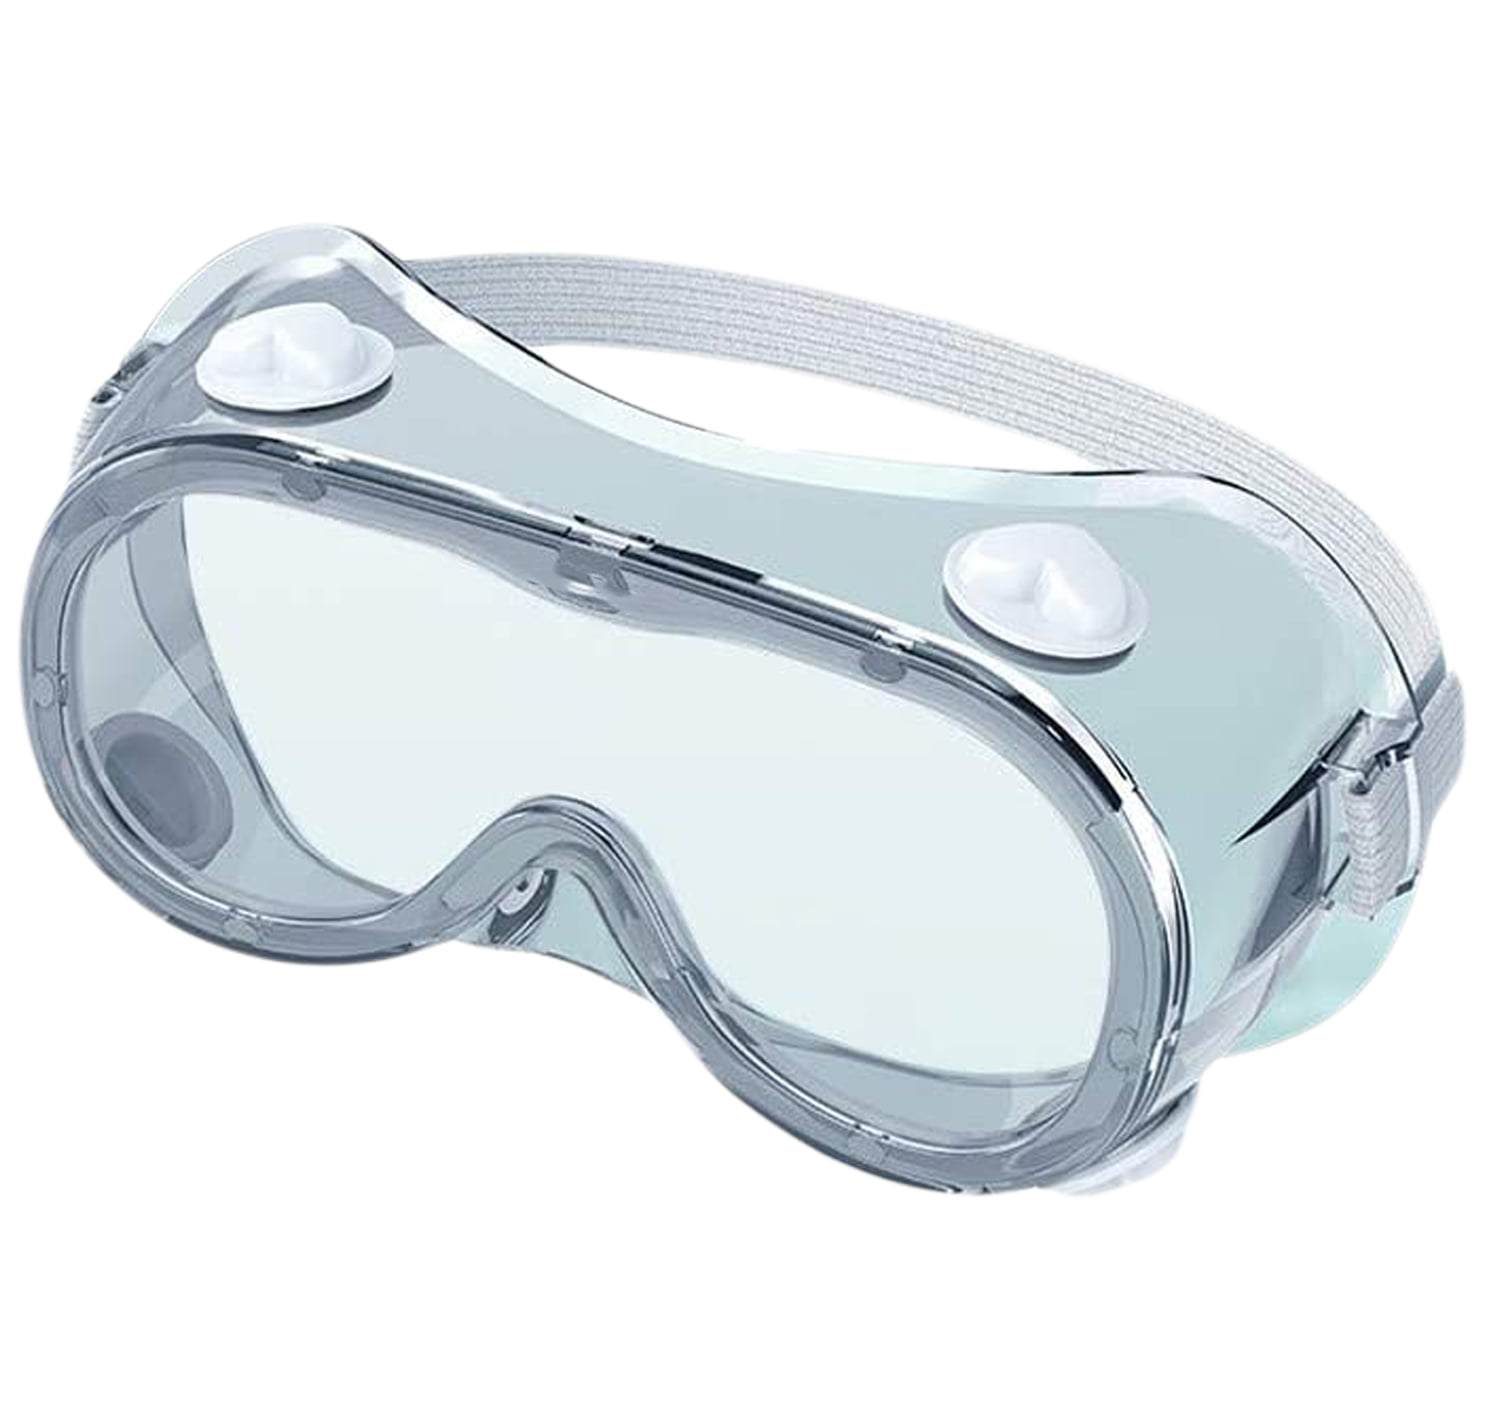 2PCS Splash Safety Goggles,Anti Fog UV Protection,Protective,Ultra Clear Lens Safety Glasses,Full Frame Indirect Vent,High Impact Resistance with Adjustable Strap,Costume Accessory for Women and Men, 